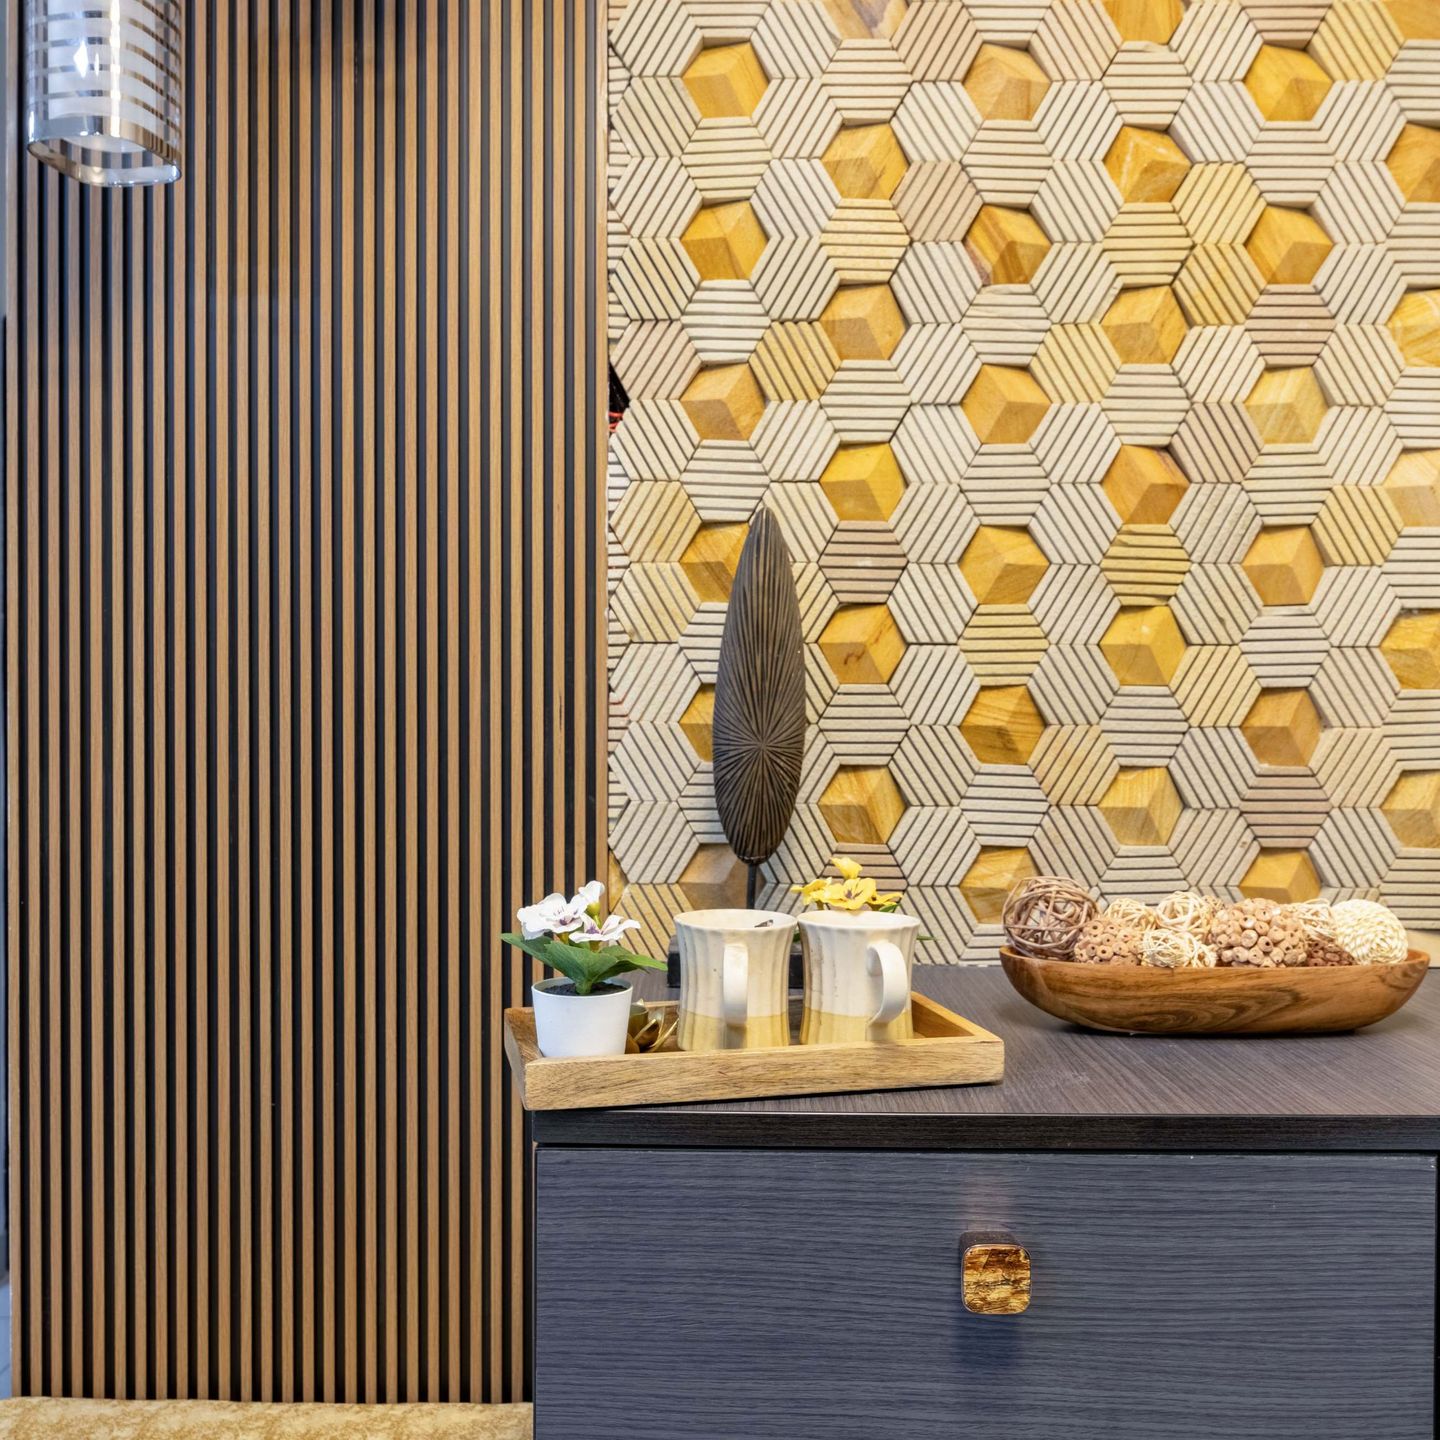 Patterned Wall Design With Wooden Details - Livspace